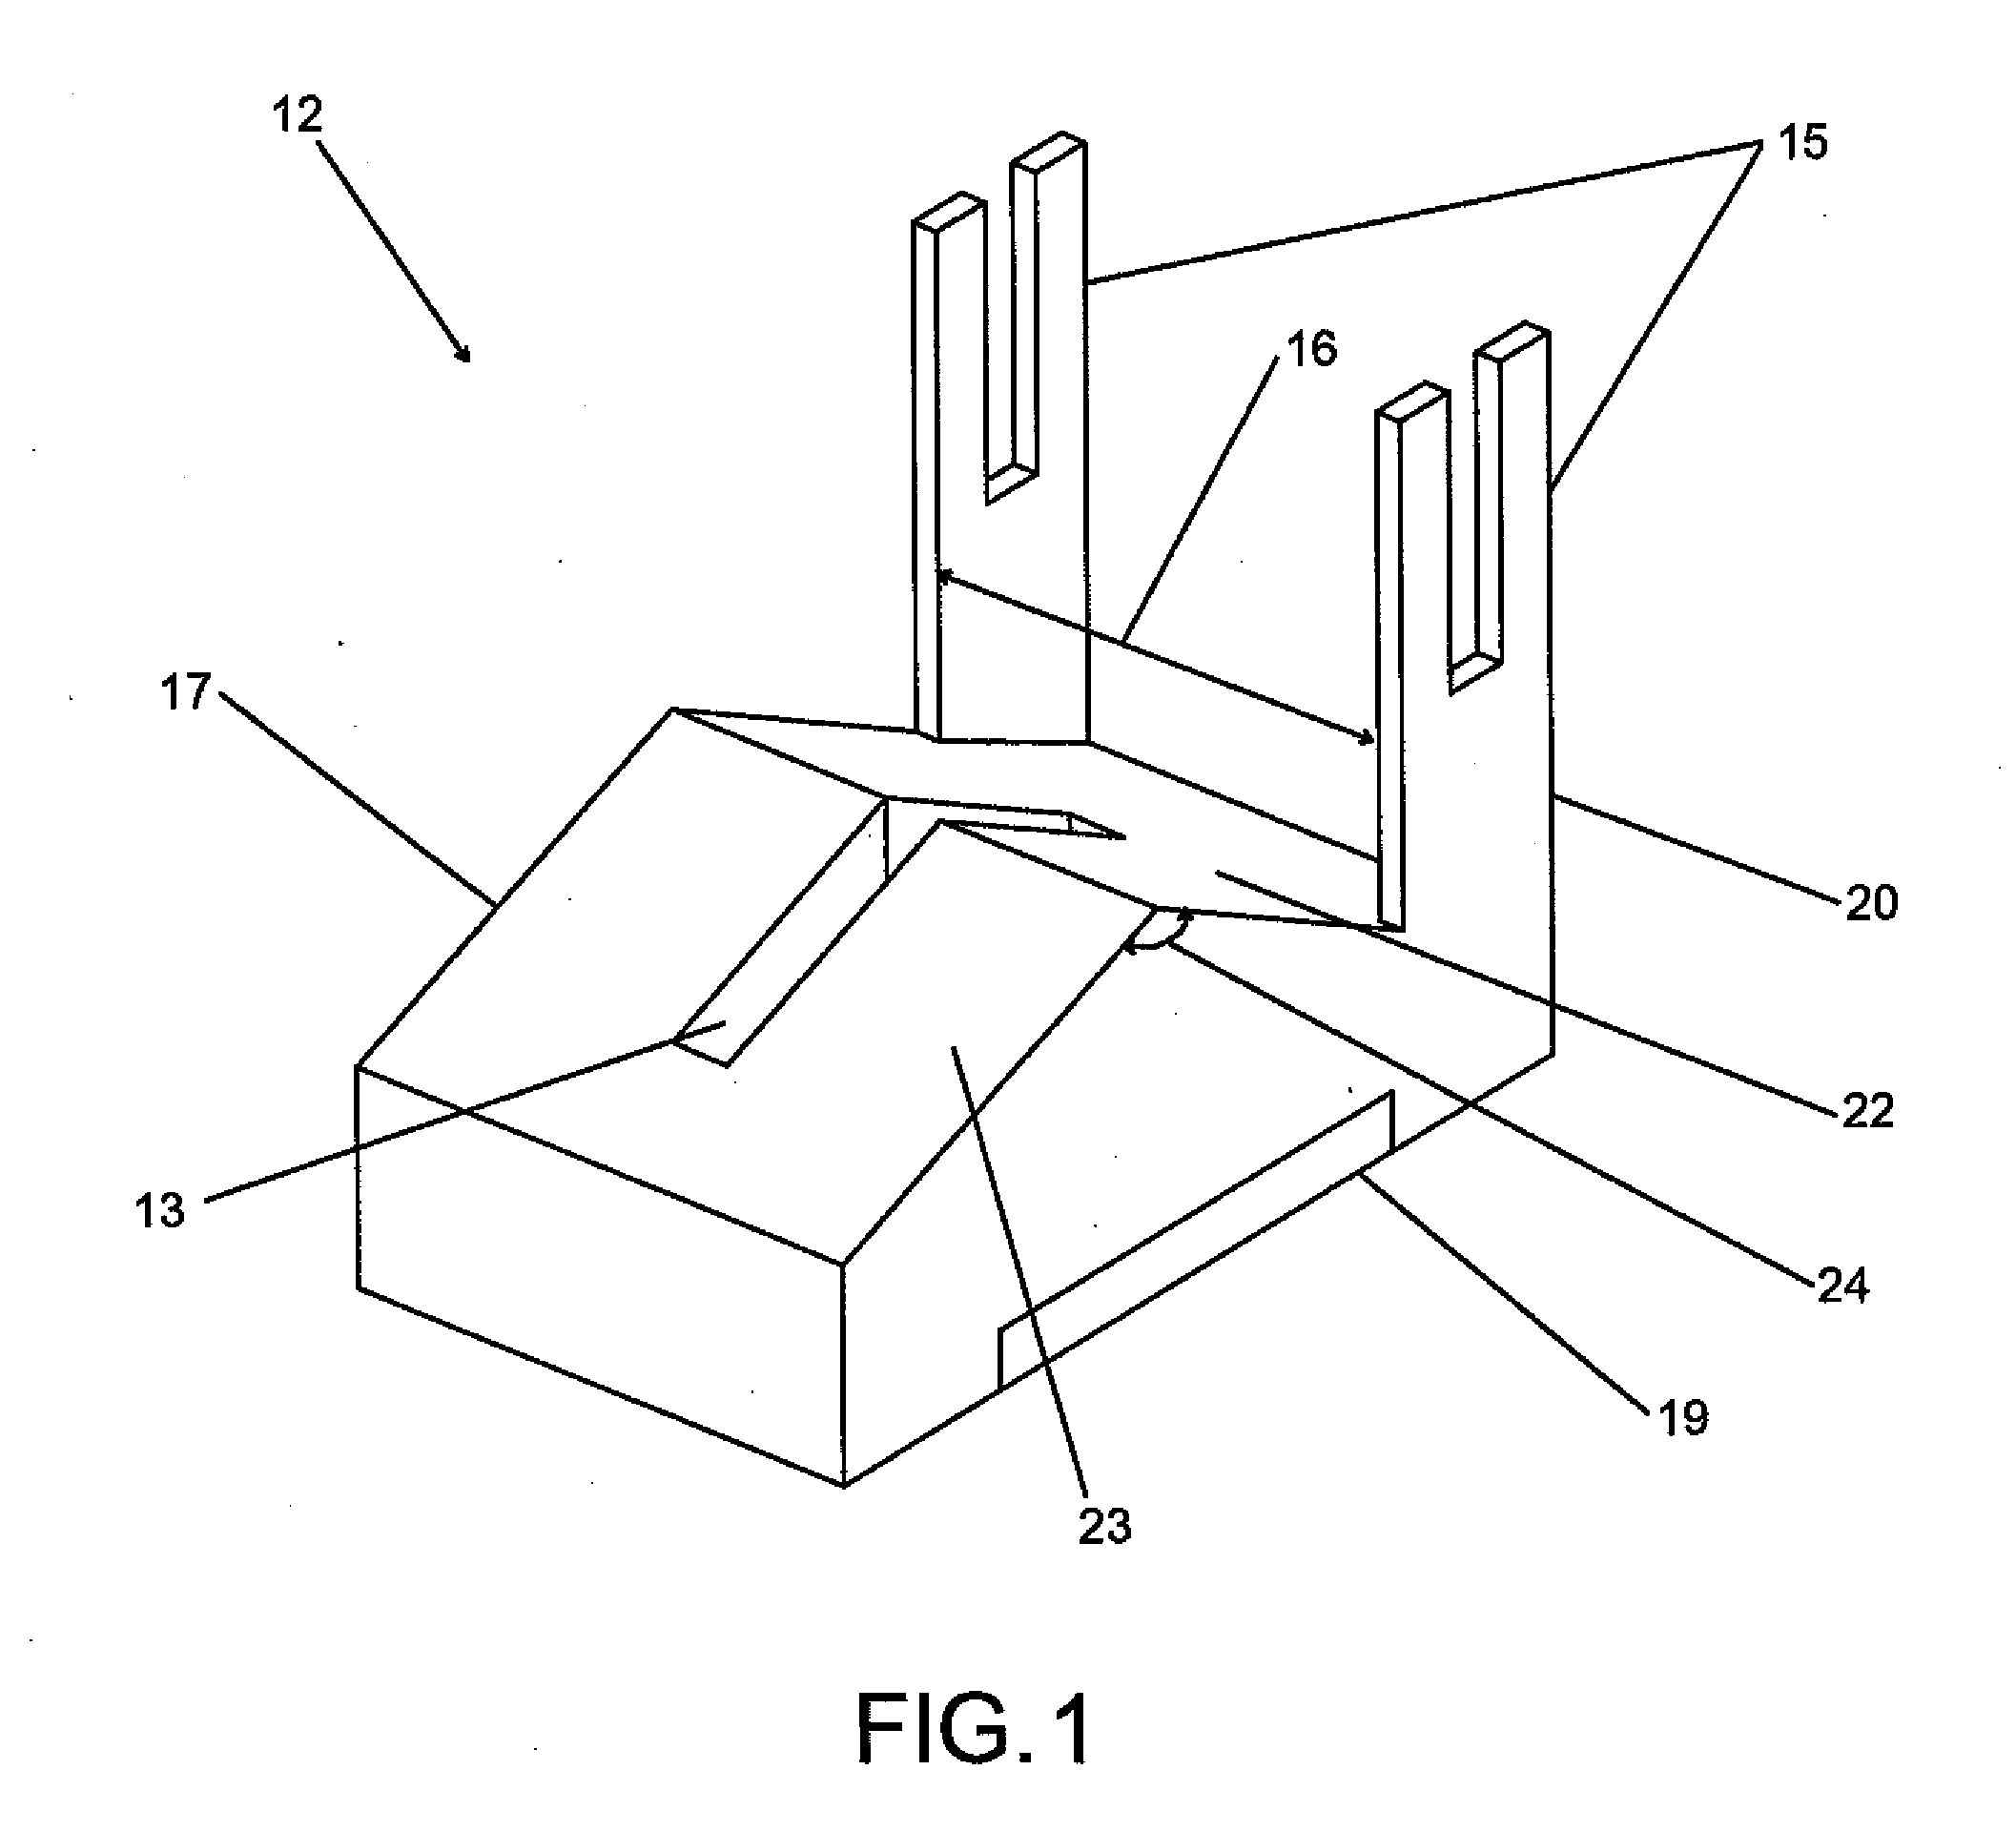 Patient positioning device and method for obtaining bent knee x-ray views